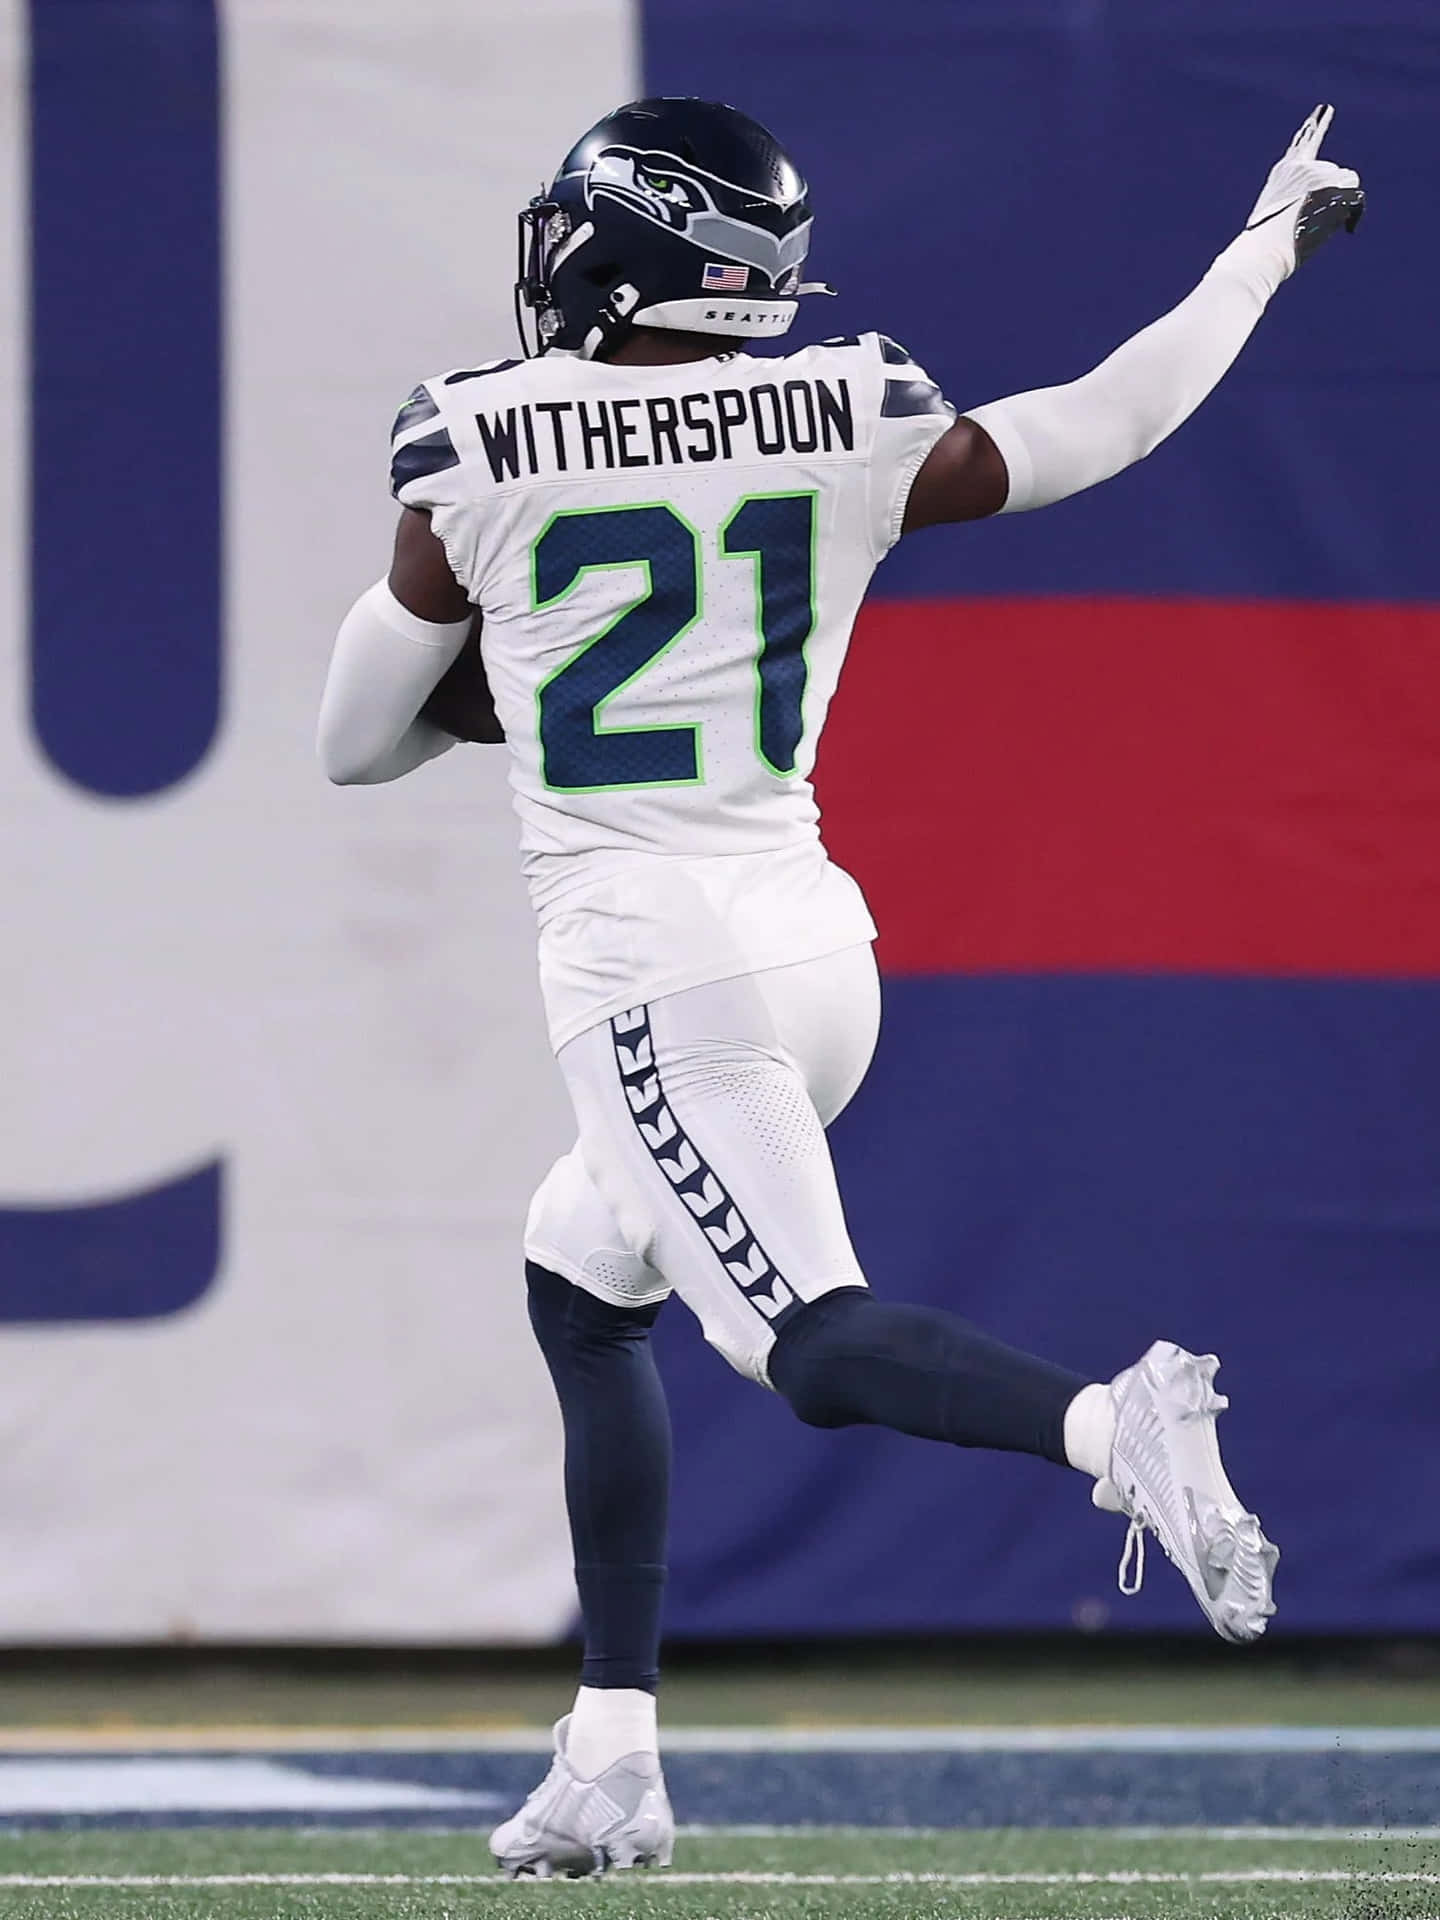 Football Player Witherspoon21 Celebration Wallpaper